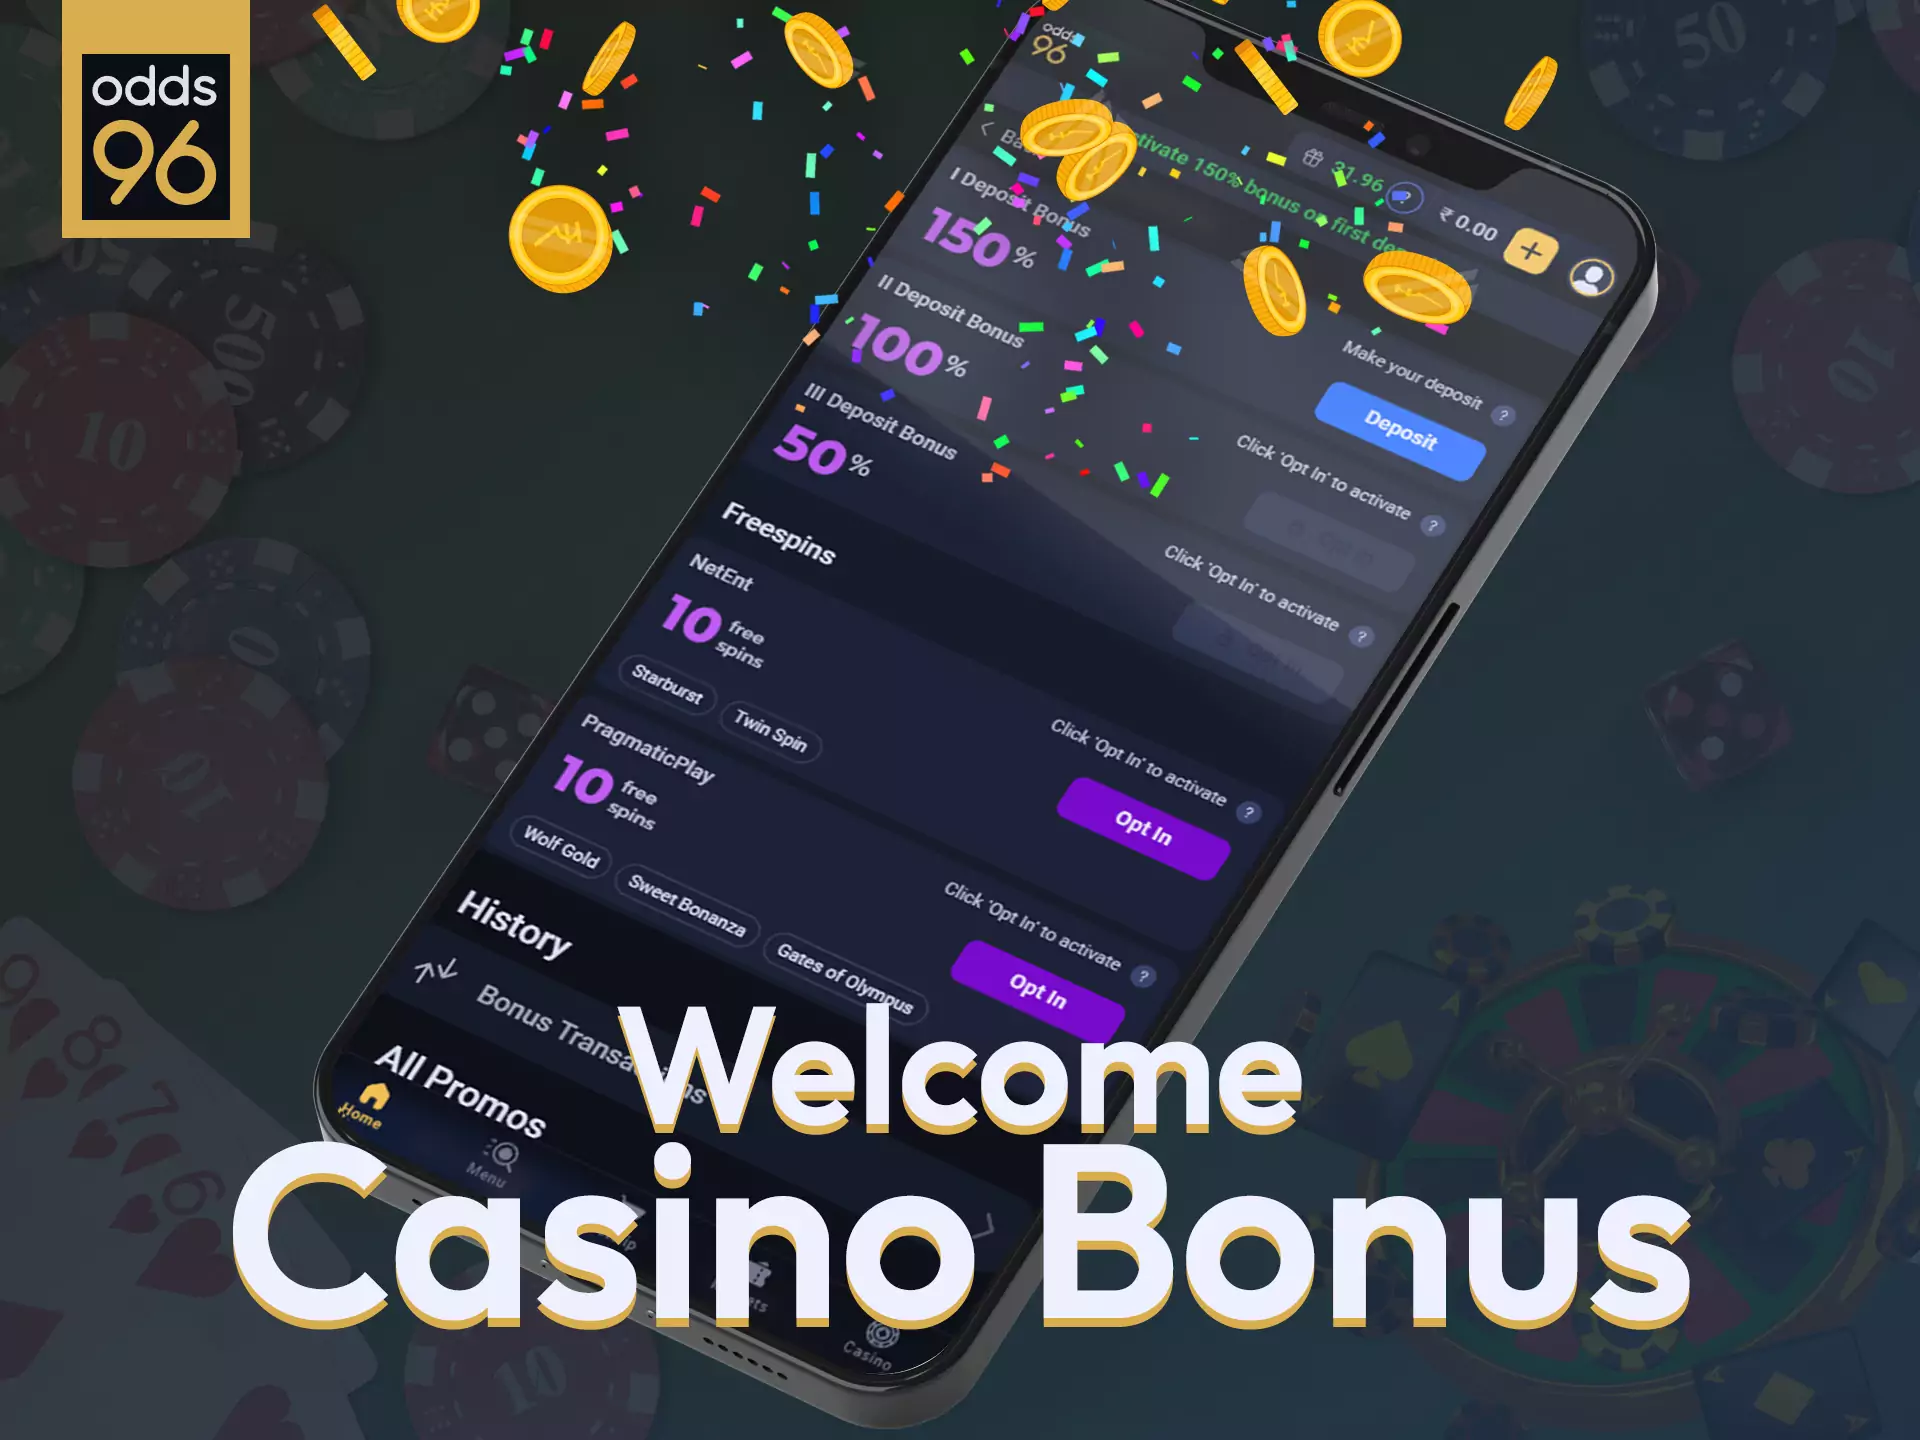 Get a special welcome bonus for the casino in Odds96.